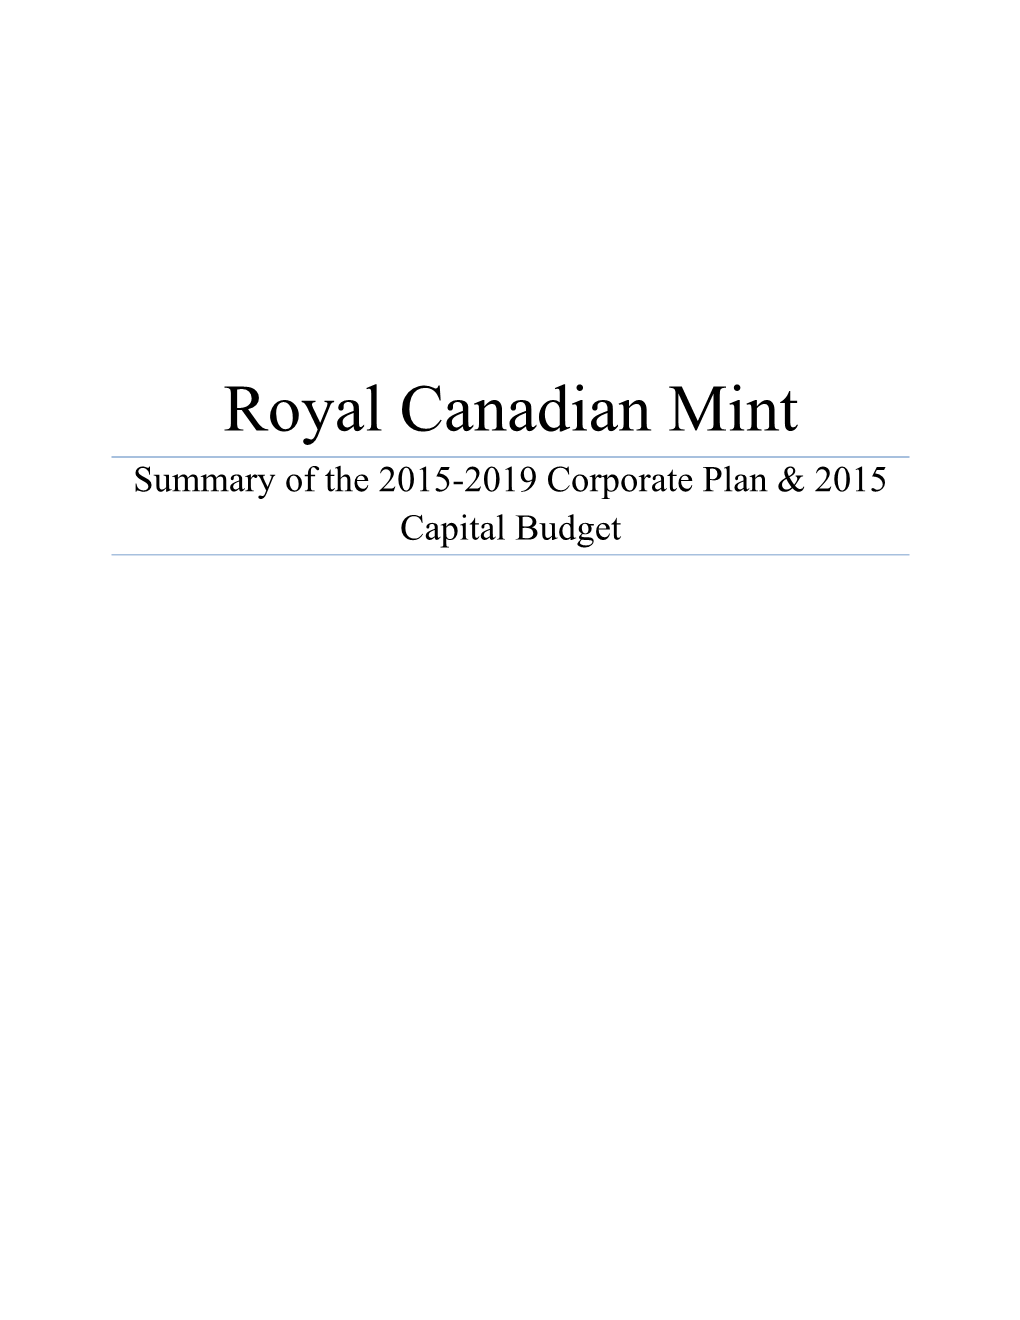 Summary of the 2015-2019 Corporate Plan & 2015 Capital Budget